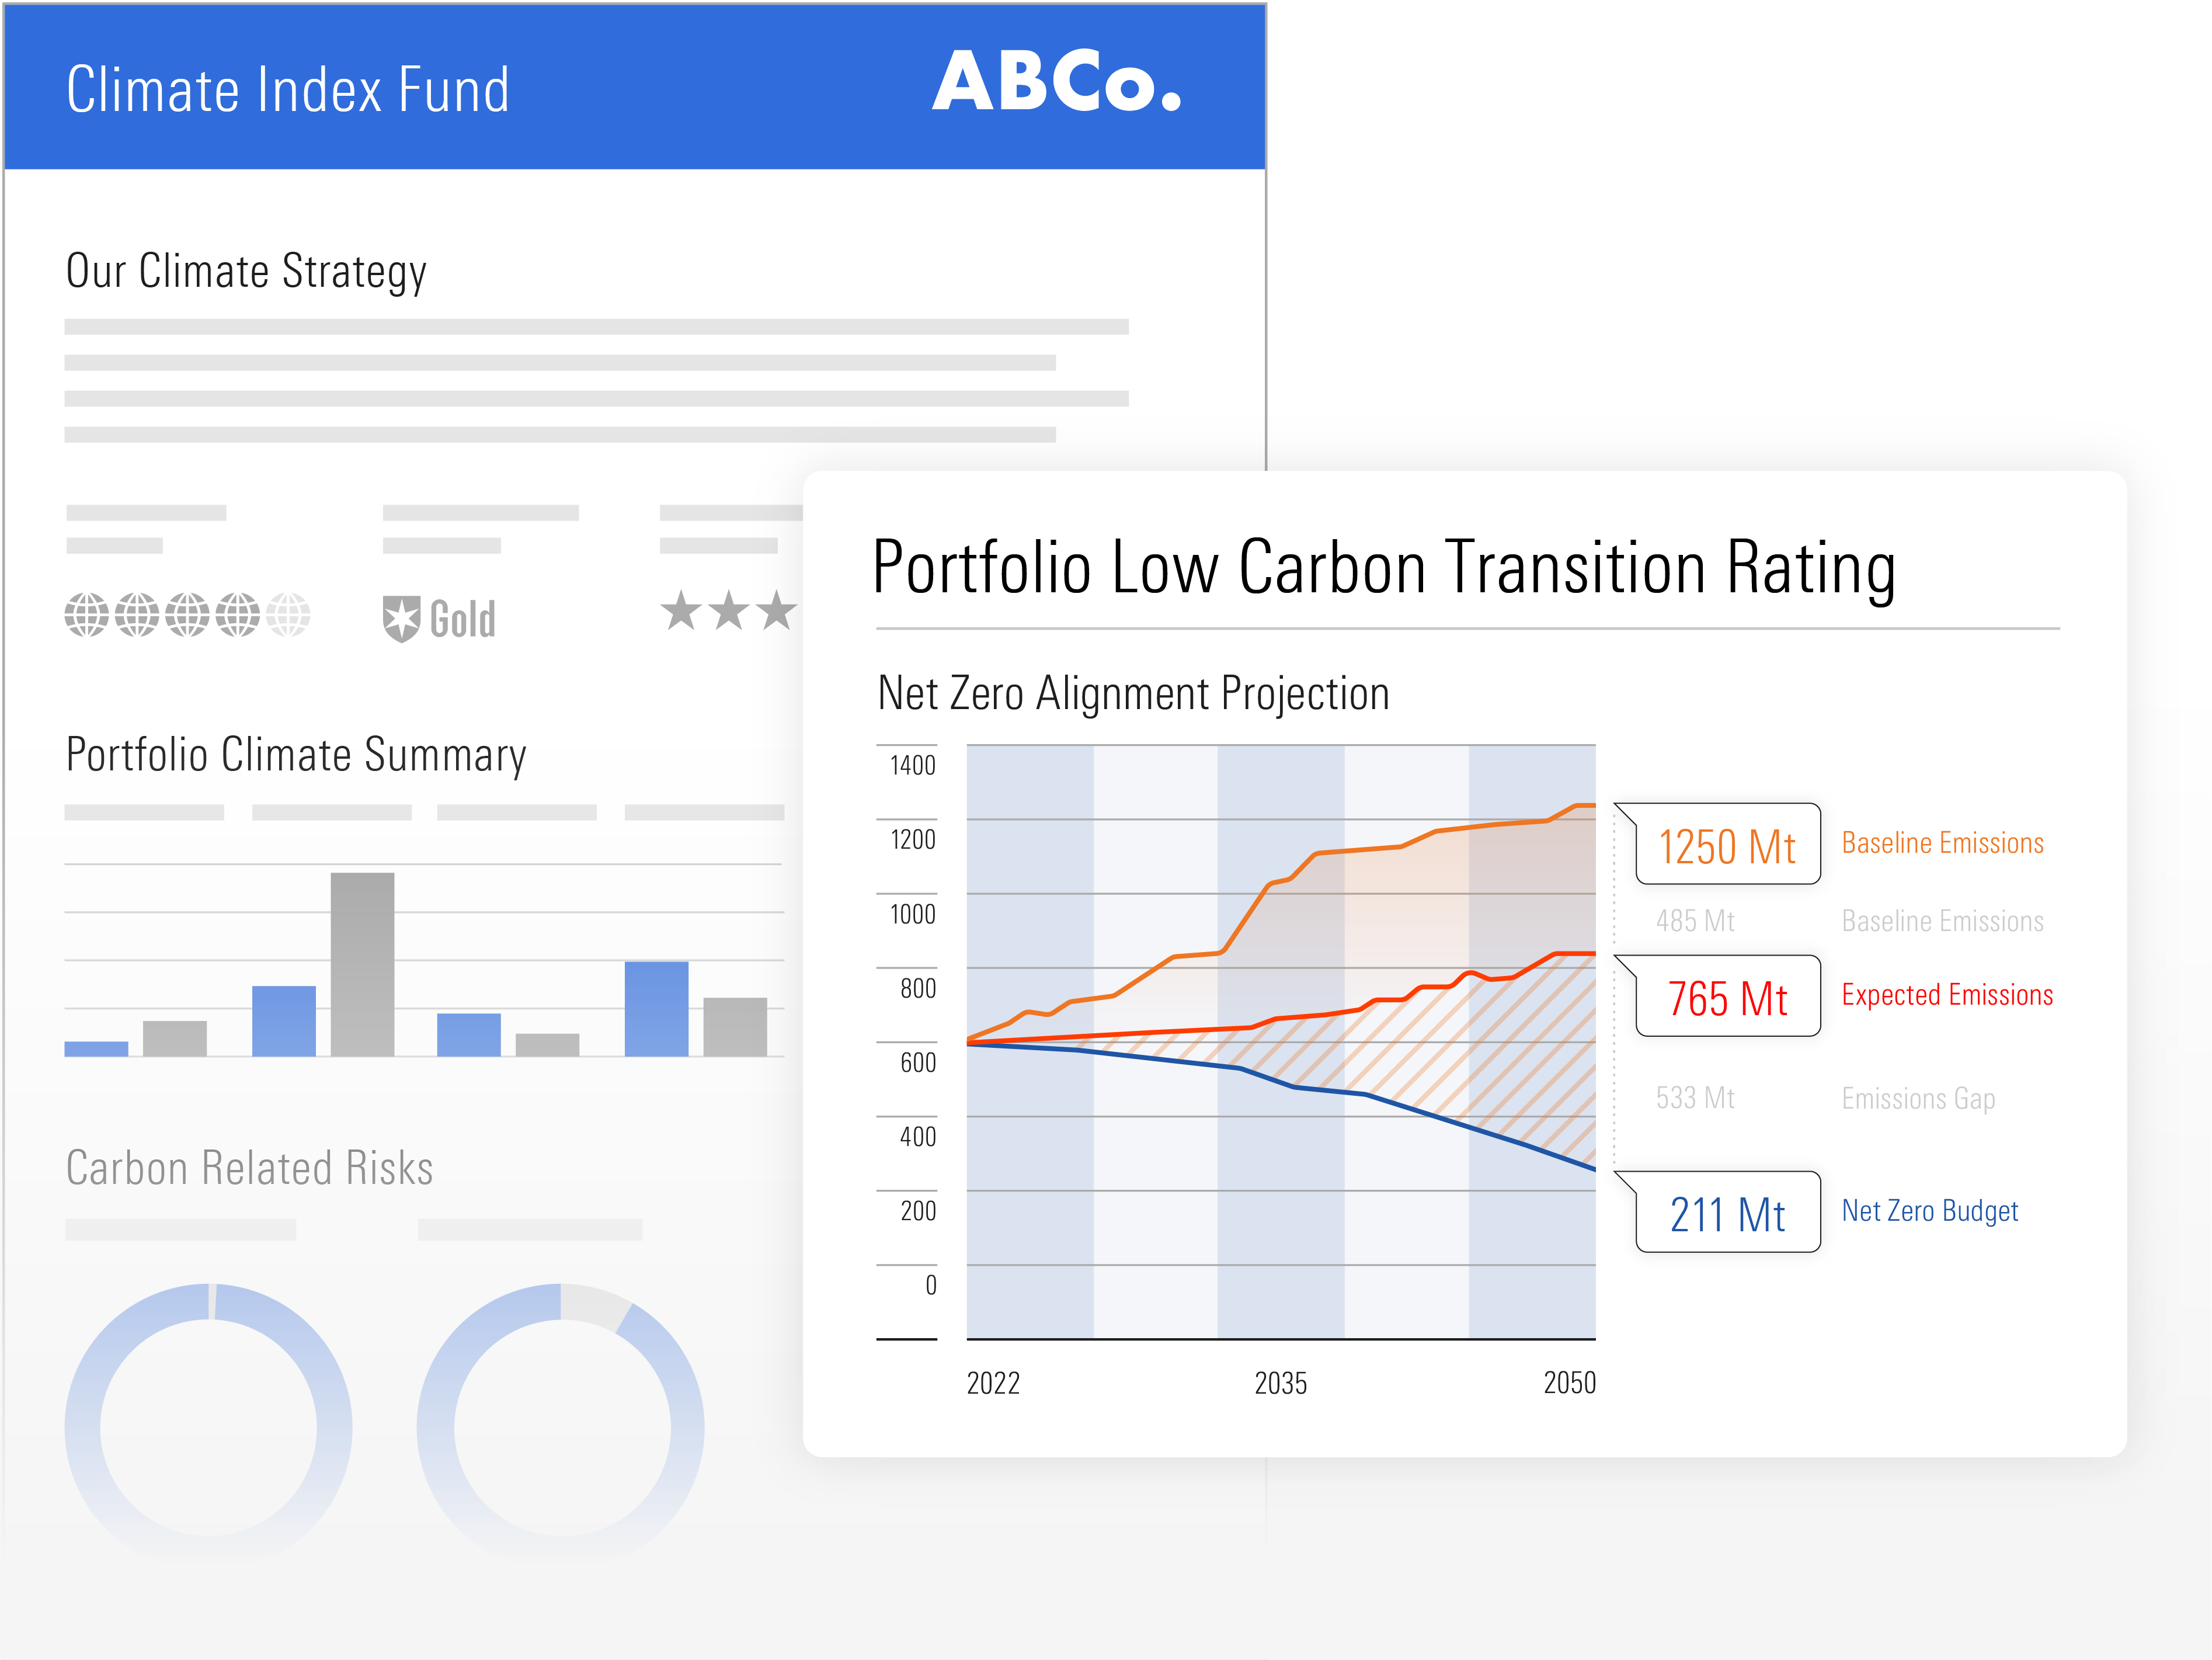 Illustration of climate index fund rating and a net zero alignment projection graph for portfolio low carbon transition rating.